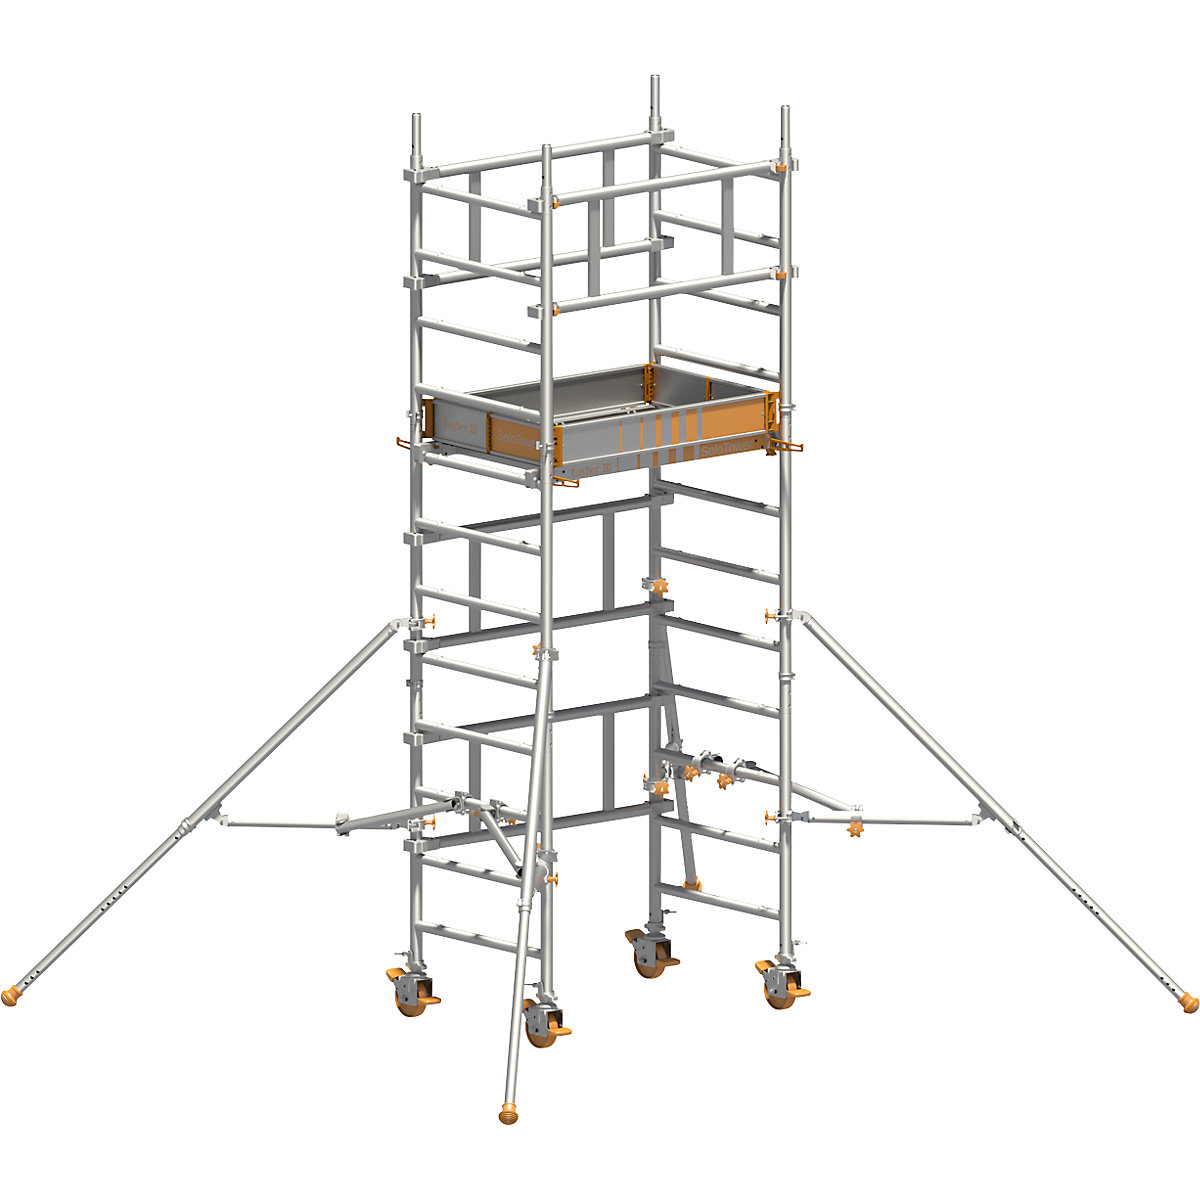 SoloTower one-person mobile access tower – Layher